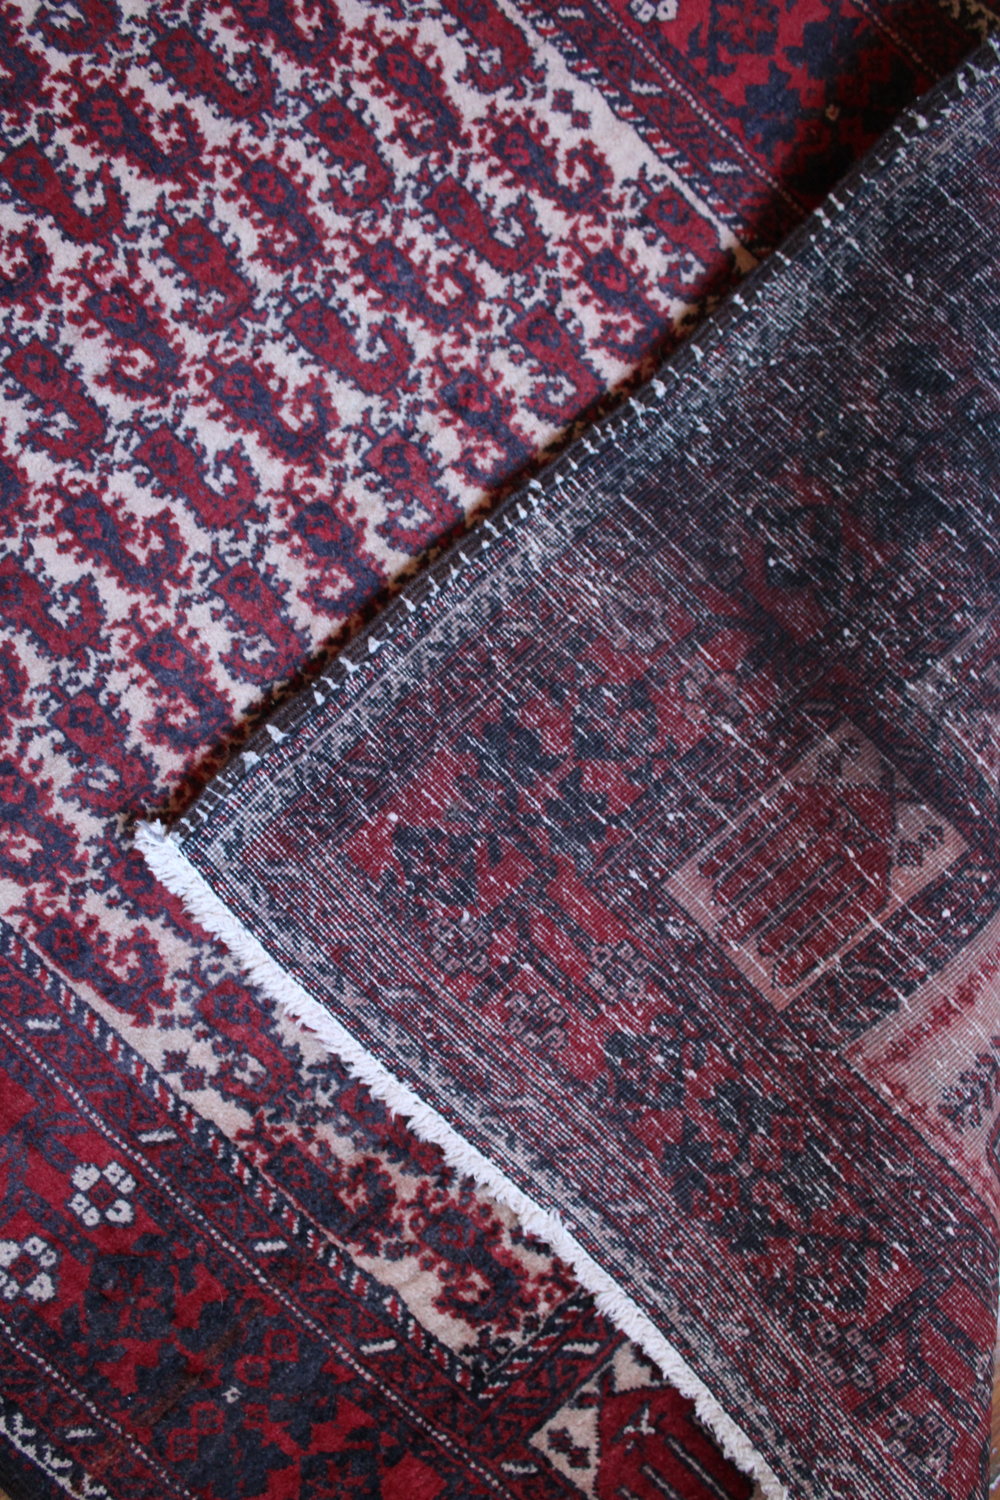 How to Tell if a Rug is Handmade | Miranda Schroeder Blog

www.mirandaschroeder.com

#persianrugs #vintagerugs #rugsnotdrugs #carpets #ihavethisthingwithrugs